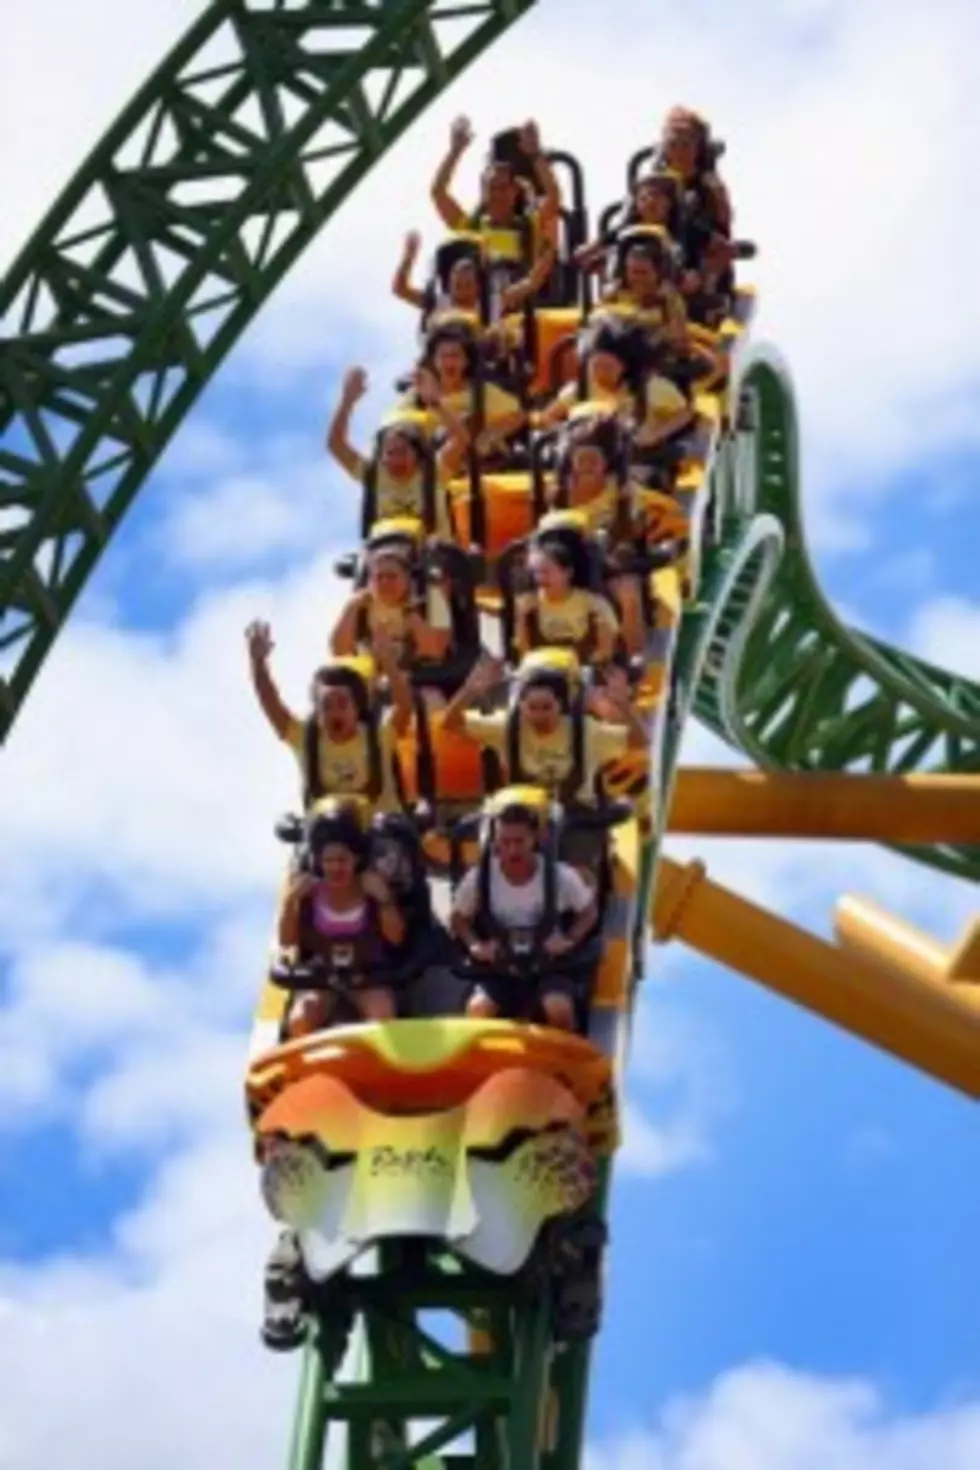 Grandma Goes on Roller Coaster and Loves it  [VIDEO]